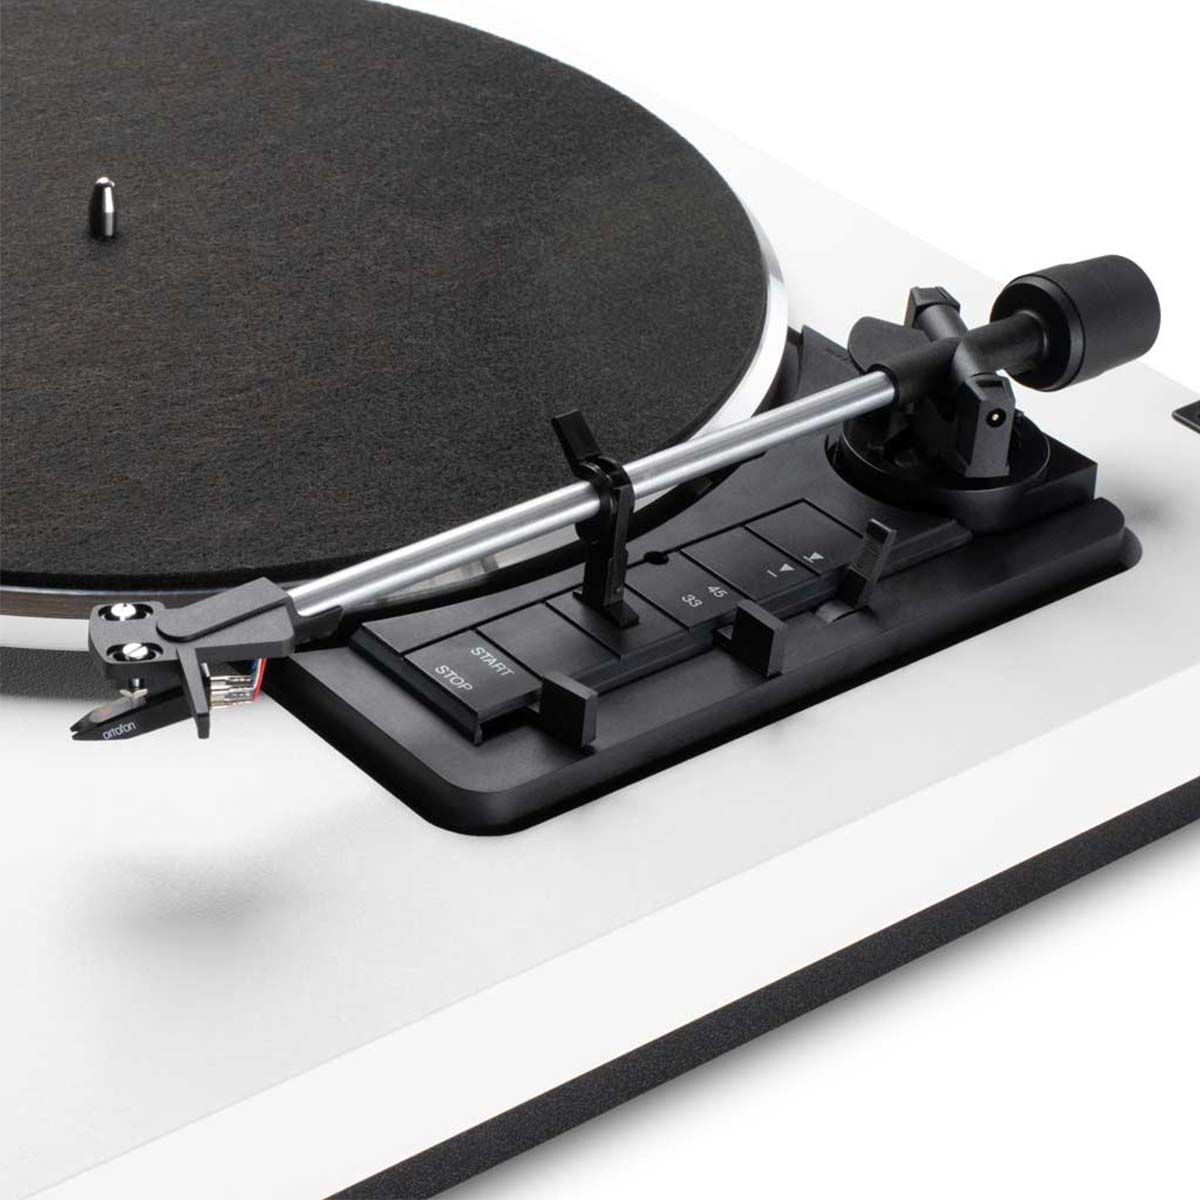 Andover SpinDeck Max Turntable, White, tonearm detail